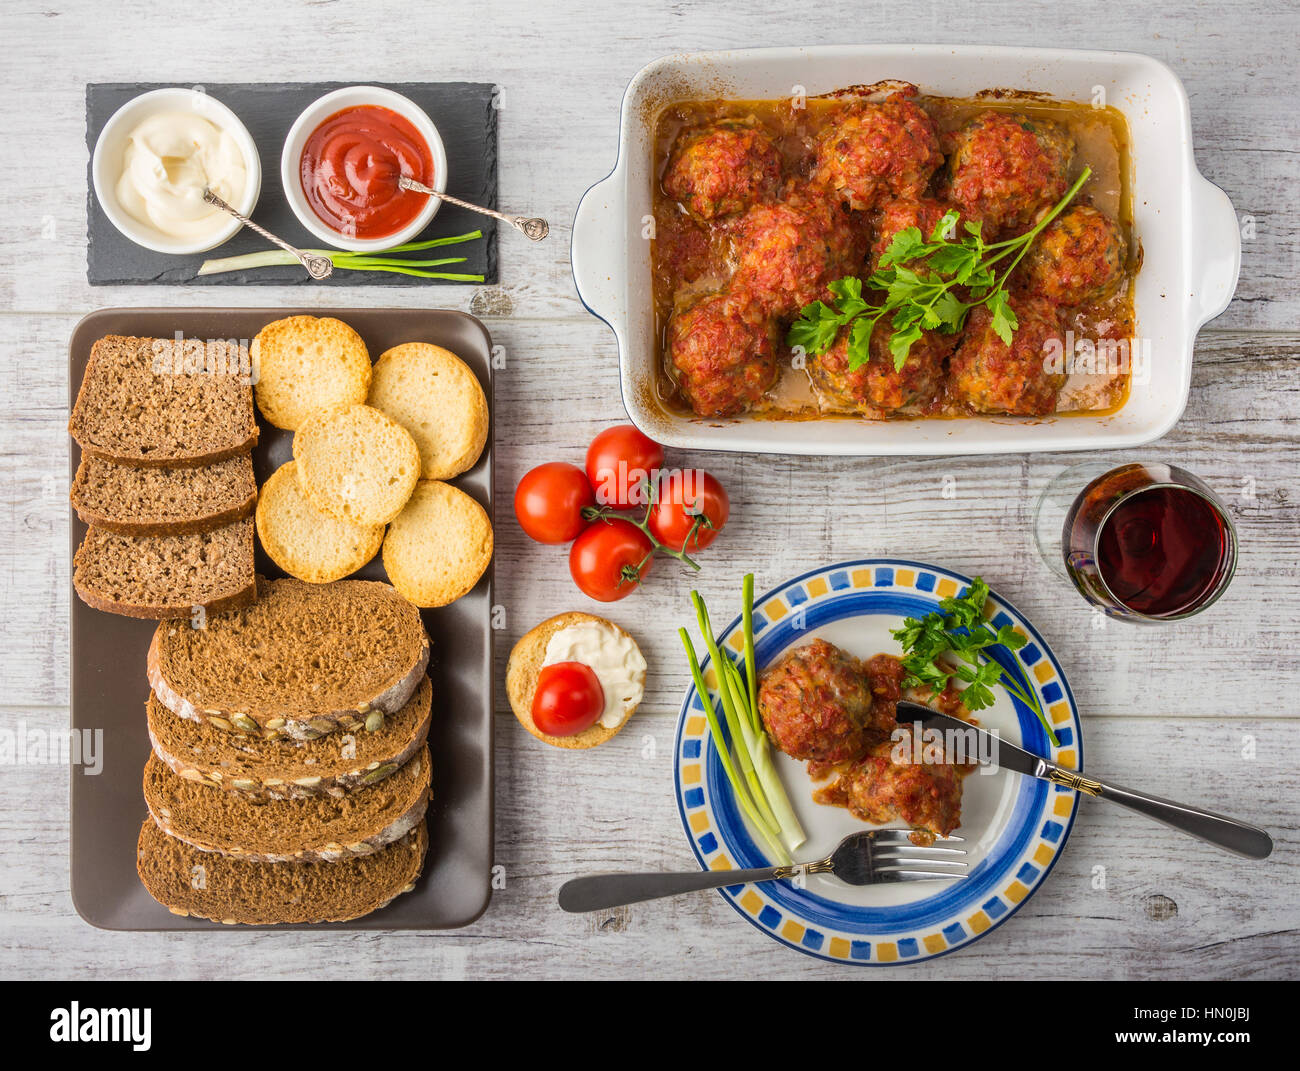 Delicious meal rich in protein and vitamins. Meatballs with tomato sauce, tomatoes, bread, mayonnaise, ketchup and a glass of wine on a white wooden b Stock Photo